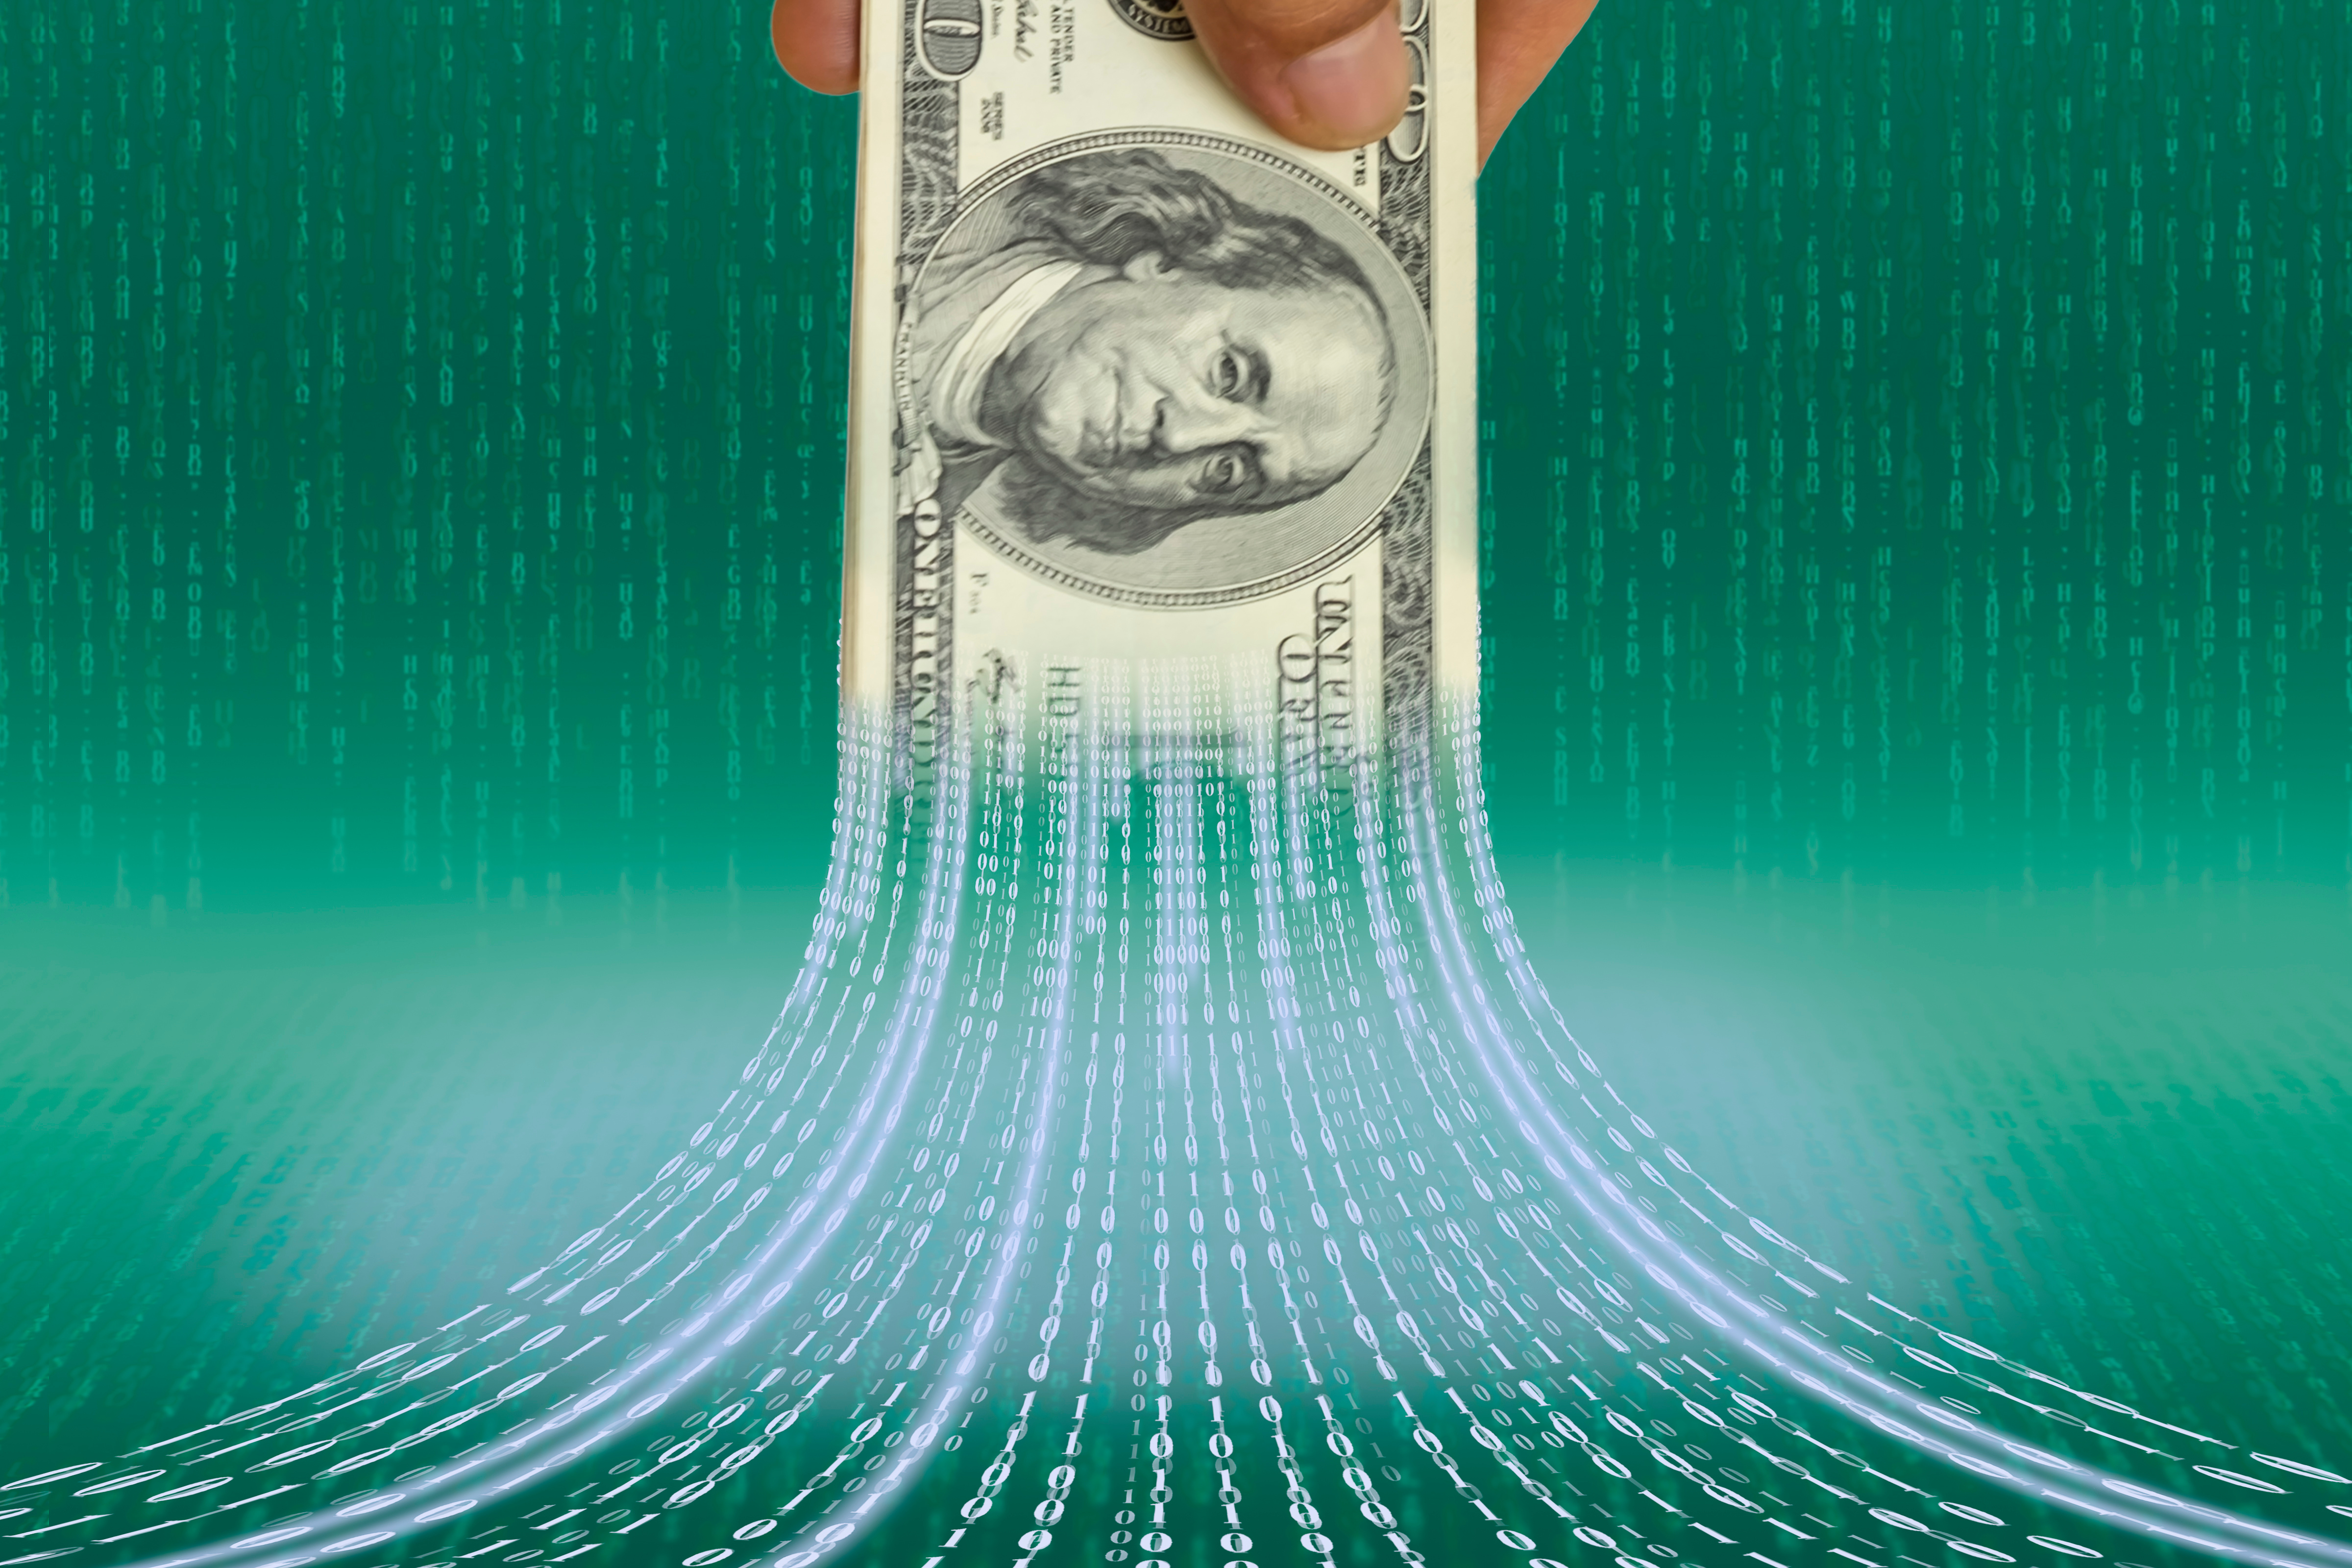 FINTEC concept image. US bank note with binary code on abstract